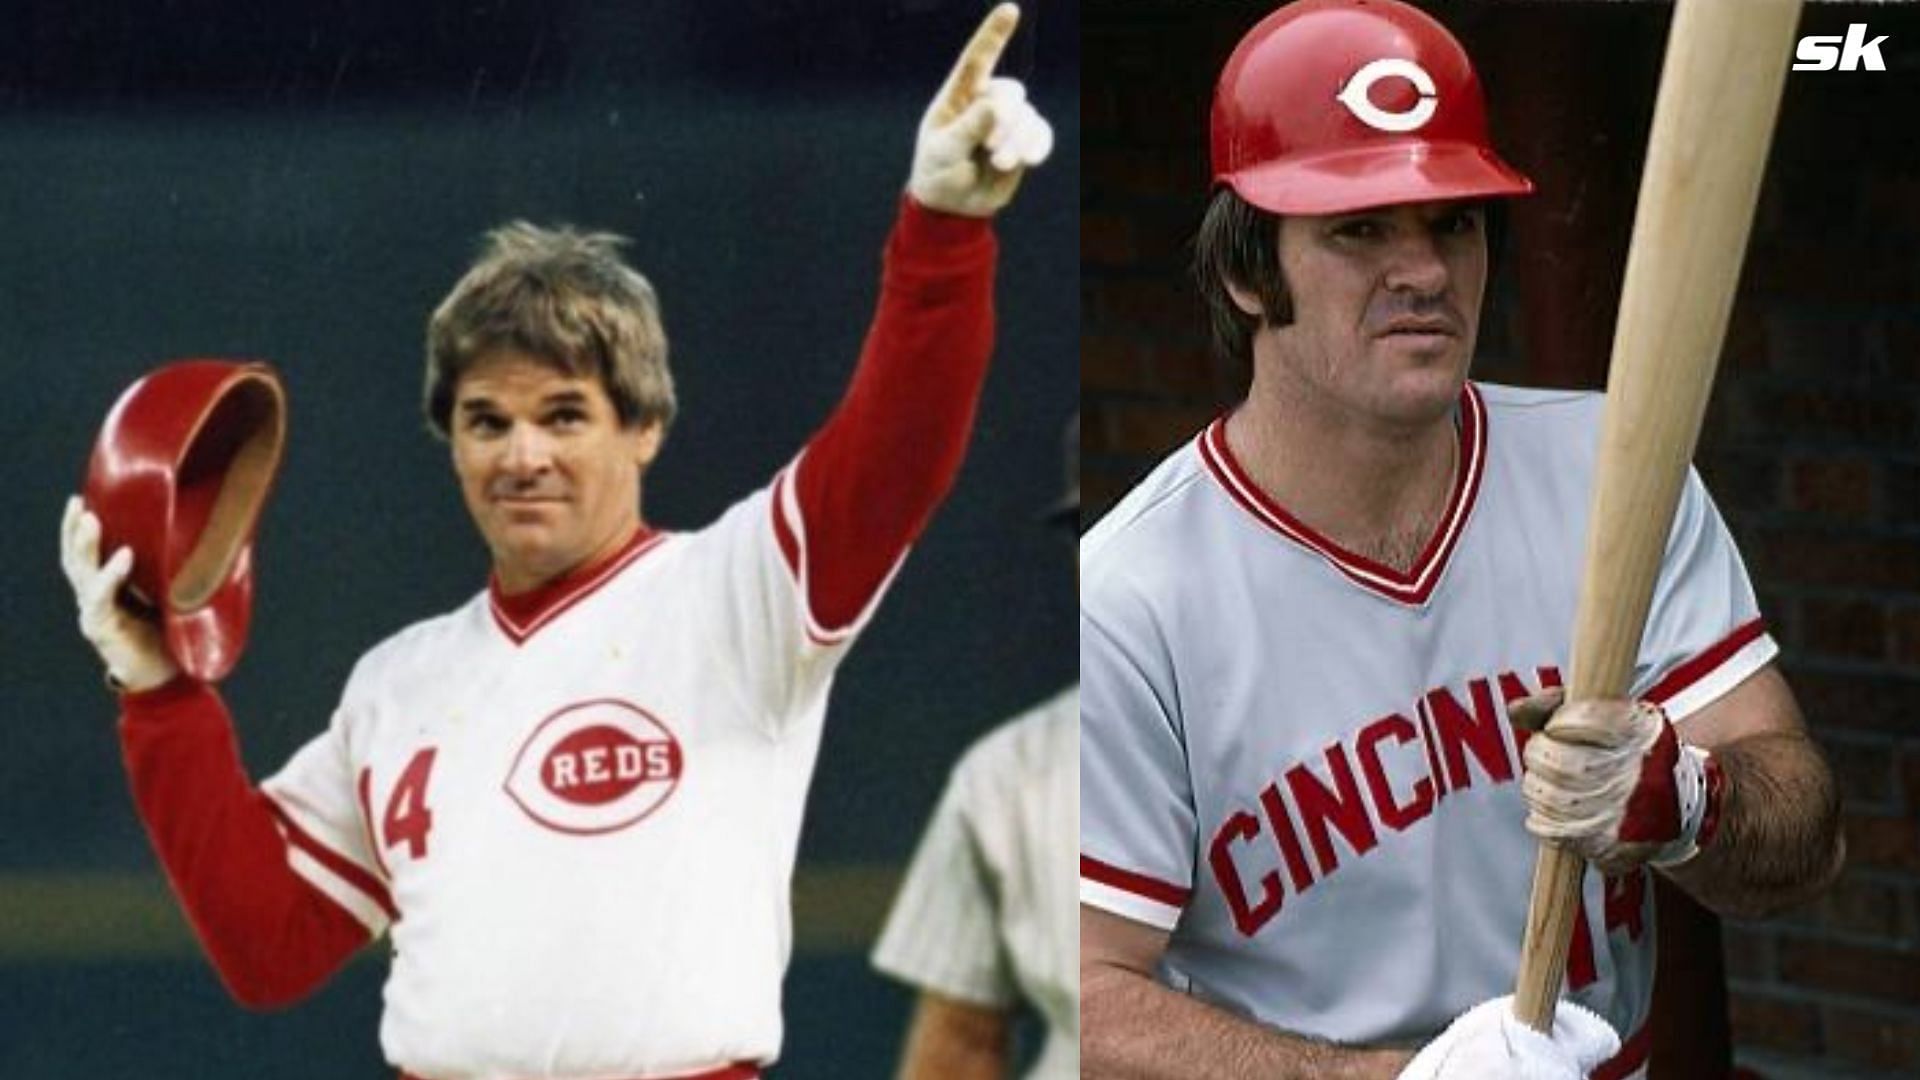 Cincinnati Reds legend Pete Rose is all set to place his first legal